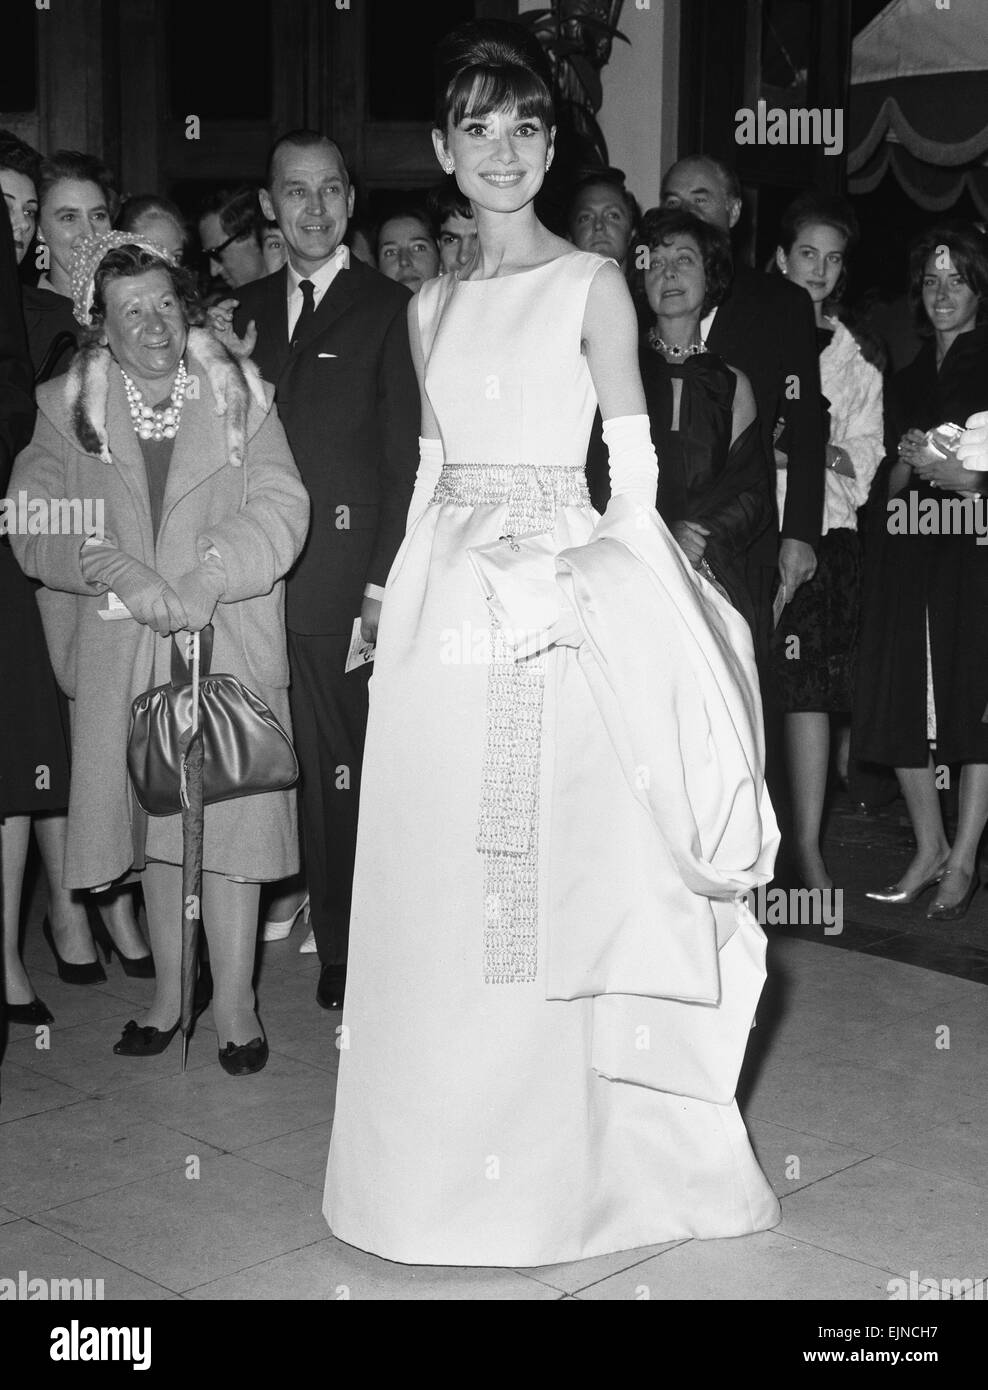 Actress Audrey Hepburn arrives at the London premiere of her latest movie 'Breakfast At Tiffany's' at the Plaza Theatre, watched by an admiring crowd. 19th October 1961. Stock Photo